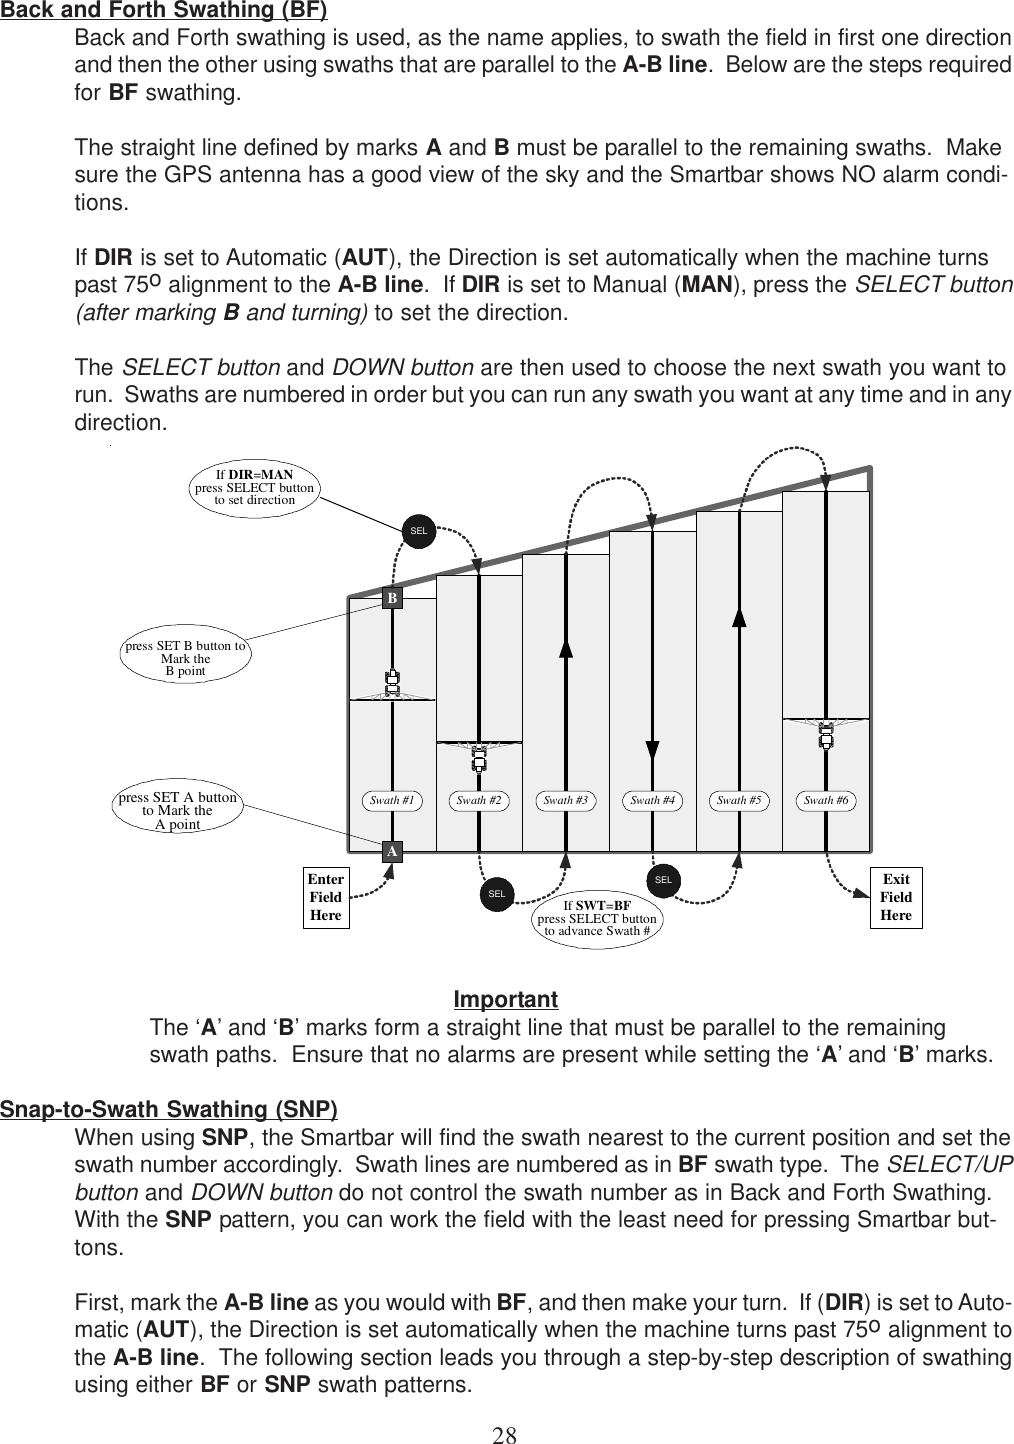 28Back and Forth Swathing (BF)Back and Forth swathing is used, as the name applies, to swath the field in first one directionand then the other using swaths that are parallel to the A-B line.  Below are the steps requiredfor BF swathing.The straight line defined by marks A and B must be parallel to the remaining swaths.  Makesure the GPS antenna has a good view of the sky and the Smartbar shows NO alarm condi-tions.If DIR is set to Automatic (AUT), the Direction is set automatically when the machine turnspast 75o alignment to the A-B line.  If DIR is set to Manual (MAN), press the SELECT button(after marking B and turning) to set the direction.The SELECT button and DOWN button are then used to choose the next swath you want torun.  Swaths are numbered in order but you can run any swath you want at any time and in anydirection.ImportantThe ‘A’ and ‘B’ marks form a straight line that must be parallel to the remainingswath paths.  Ensure that no alarms are present while setting the ‘A’ and ‘B’ marks.Snap-to-Swath Swathing (SNP)When using SNP, the Smartbar will find the swath nearest to the current position and set theswath number accordingly.  Swath lines are numbered as in BF swath type.  The SELECT/UPbutton and DOWN button do not control the swath number as in Back and Forth Swathing.With the SNP pattern, you can work the field with the least need for pressing Smartbar but-tons.First, mark the A-B line as you would with BF, and then make your turn.  If (DIR) is set to Auto-matic (AUT), the Direction is set automatically when the machine turns past 75o alignment tothe A-B line.  The following section leads you through a step-by-step description of swathingusing either BF or SNP swath patterns.BAEnterFieldHereExitFieldHereSwath #1 Swath #2 Swath #3 Swath #4 Swath #5 Swath #6press SET B button toMark theB pointpress SET A buttonto Mark theA pointSELSELSELIf DIR=MANpress SELECT buttonto set directionIf SWT=BFpress SELECT buttonto advance Swath #